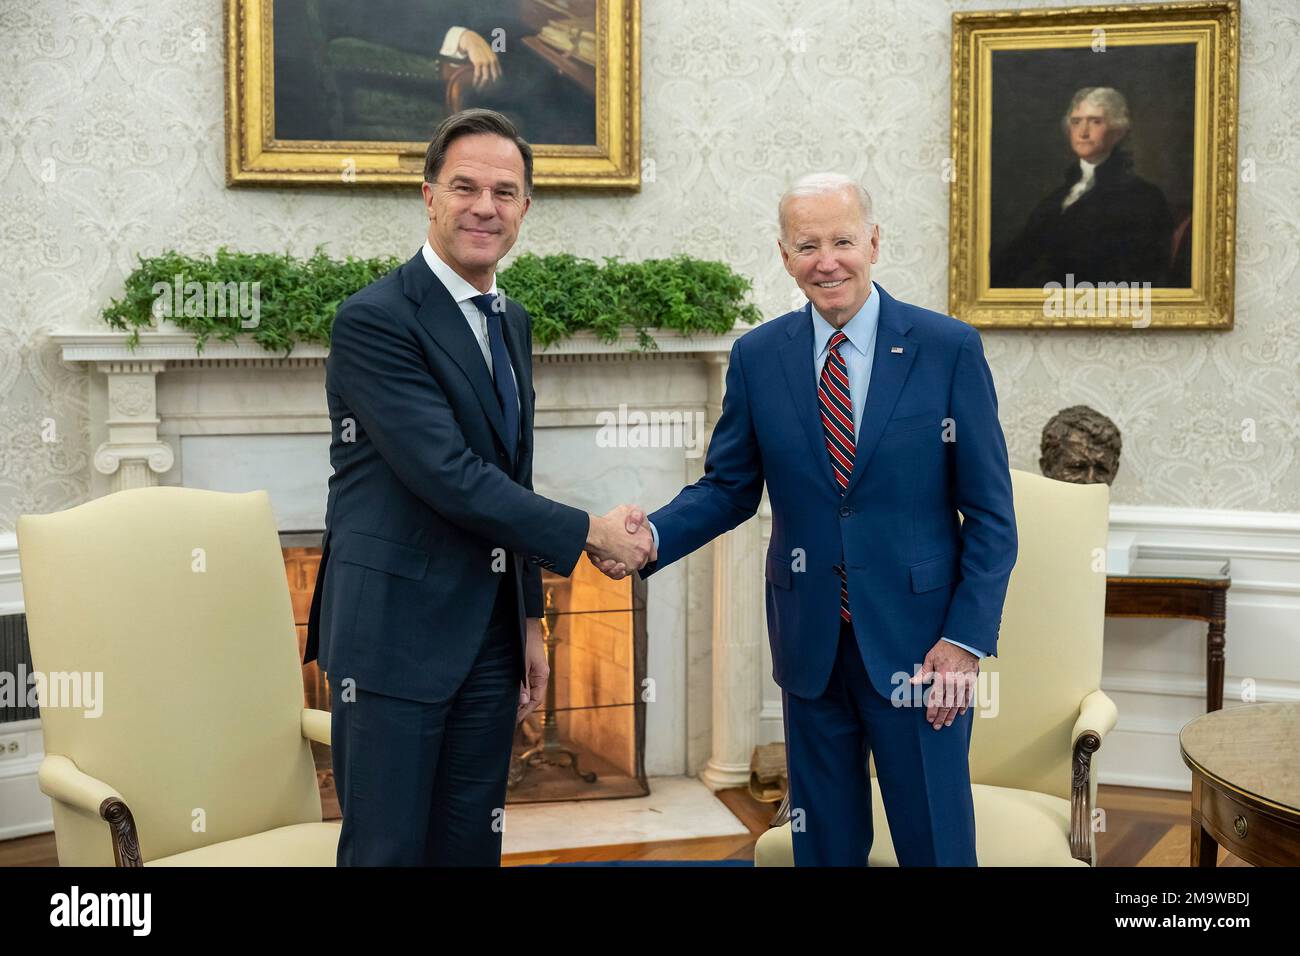 Washington, United States Of America. 17th Jan, 2023. Washington, United States of America. 17 January, 2023. U.S President Joe Biden welcomes Dutch Prime Minister Mark Rutte, left, before the start of a bilateral meeting in the Oval Office of the White House, January 17, 2023 in Washington, DC Credit: Adam Schultz/White House Photo/Alamy Live News Stock Photo